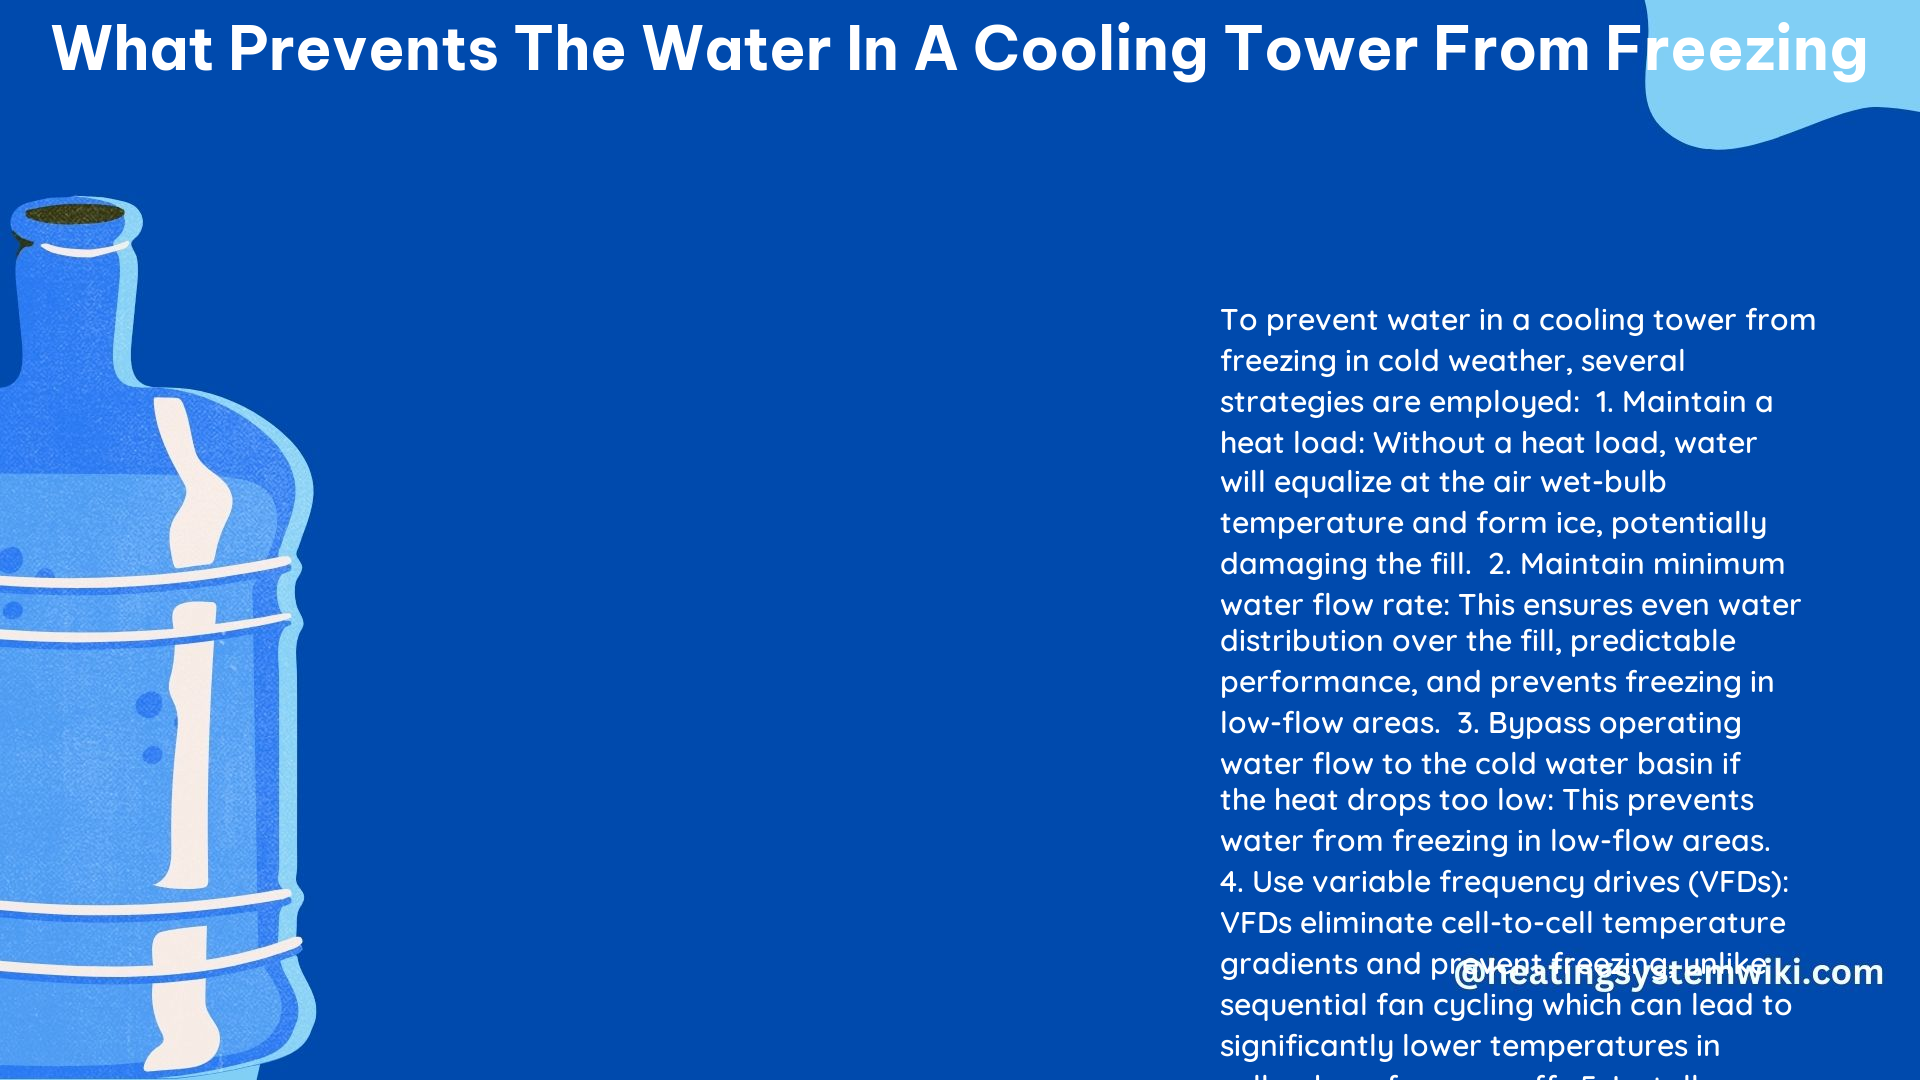 What Prevents the Water in a Cooling Tower From Freezing